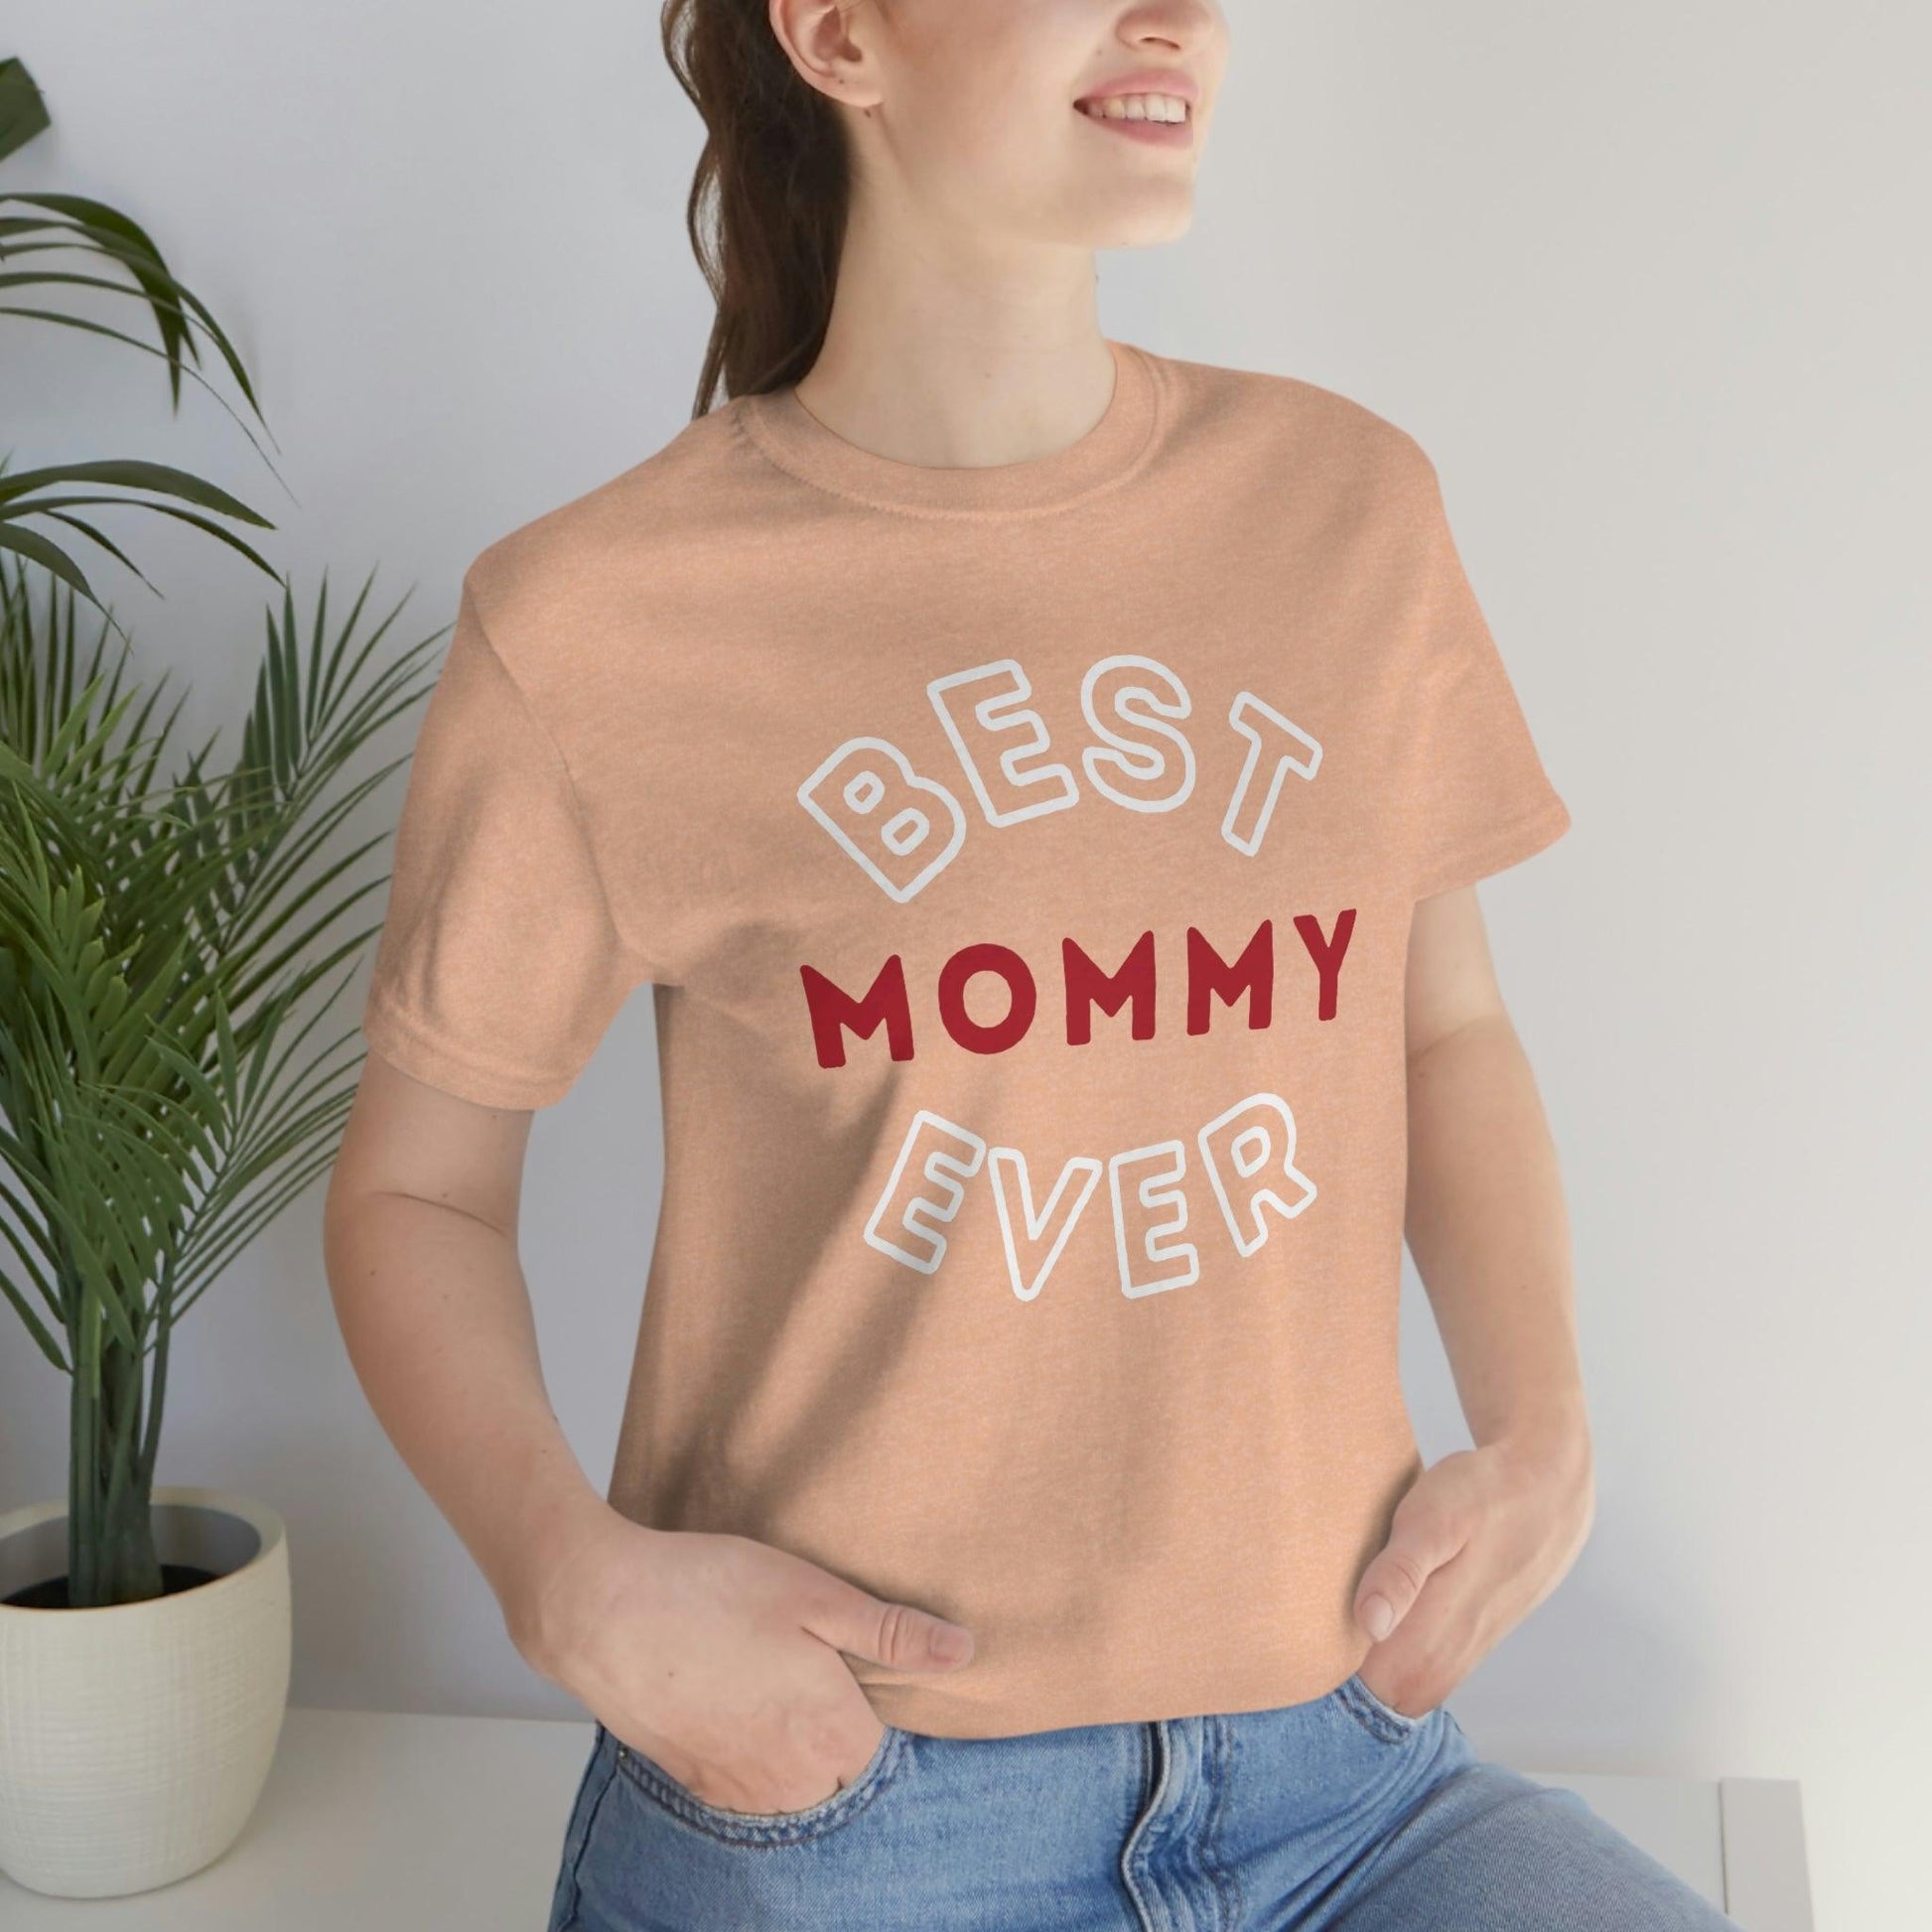 Best Mommy Ever Shirt, Mothers day shirt, gift for mom, Mom birthday gift, Mothers day t shirts, Mothers shirts, Best mothers day gifta - Giftsmojo